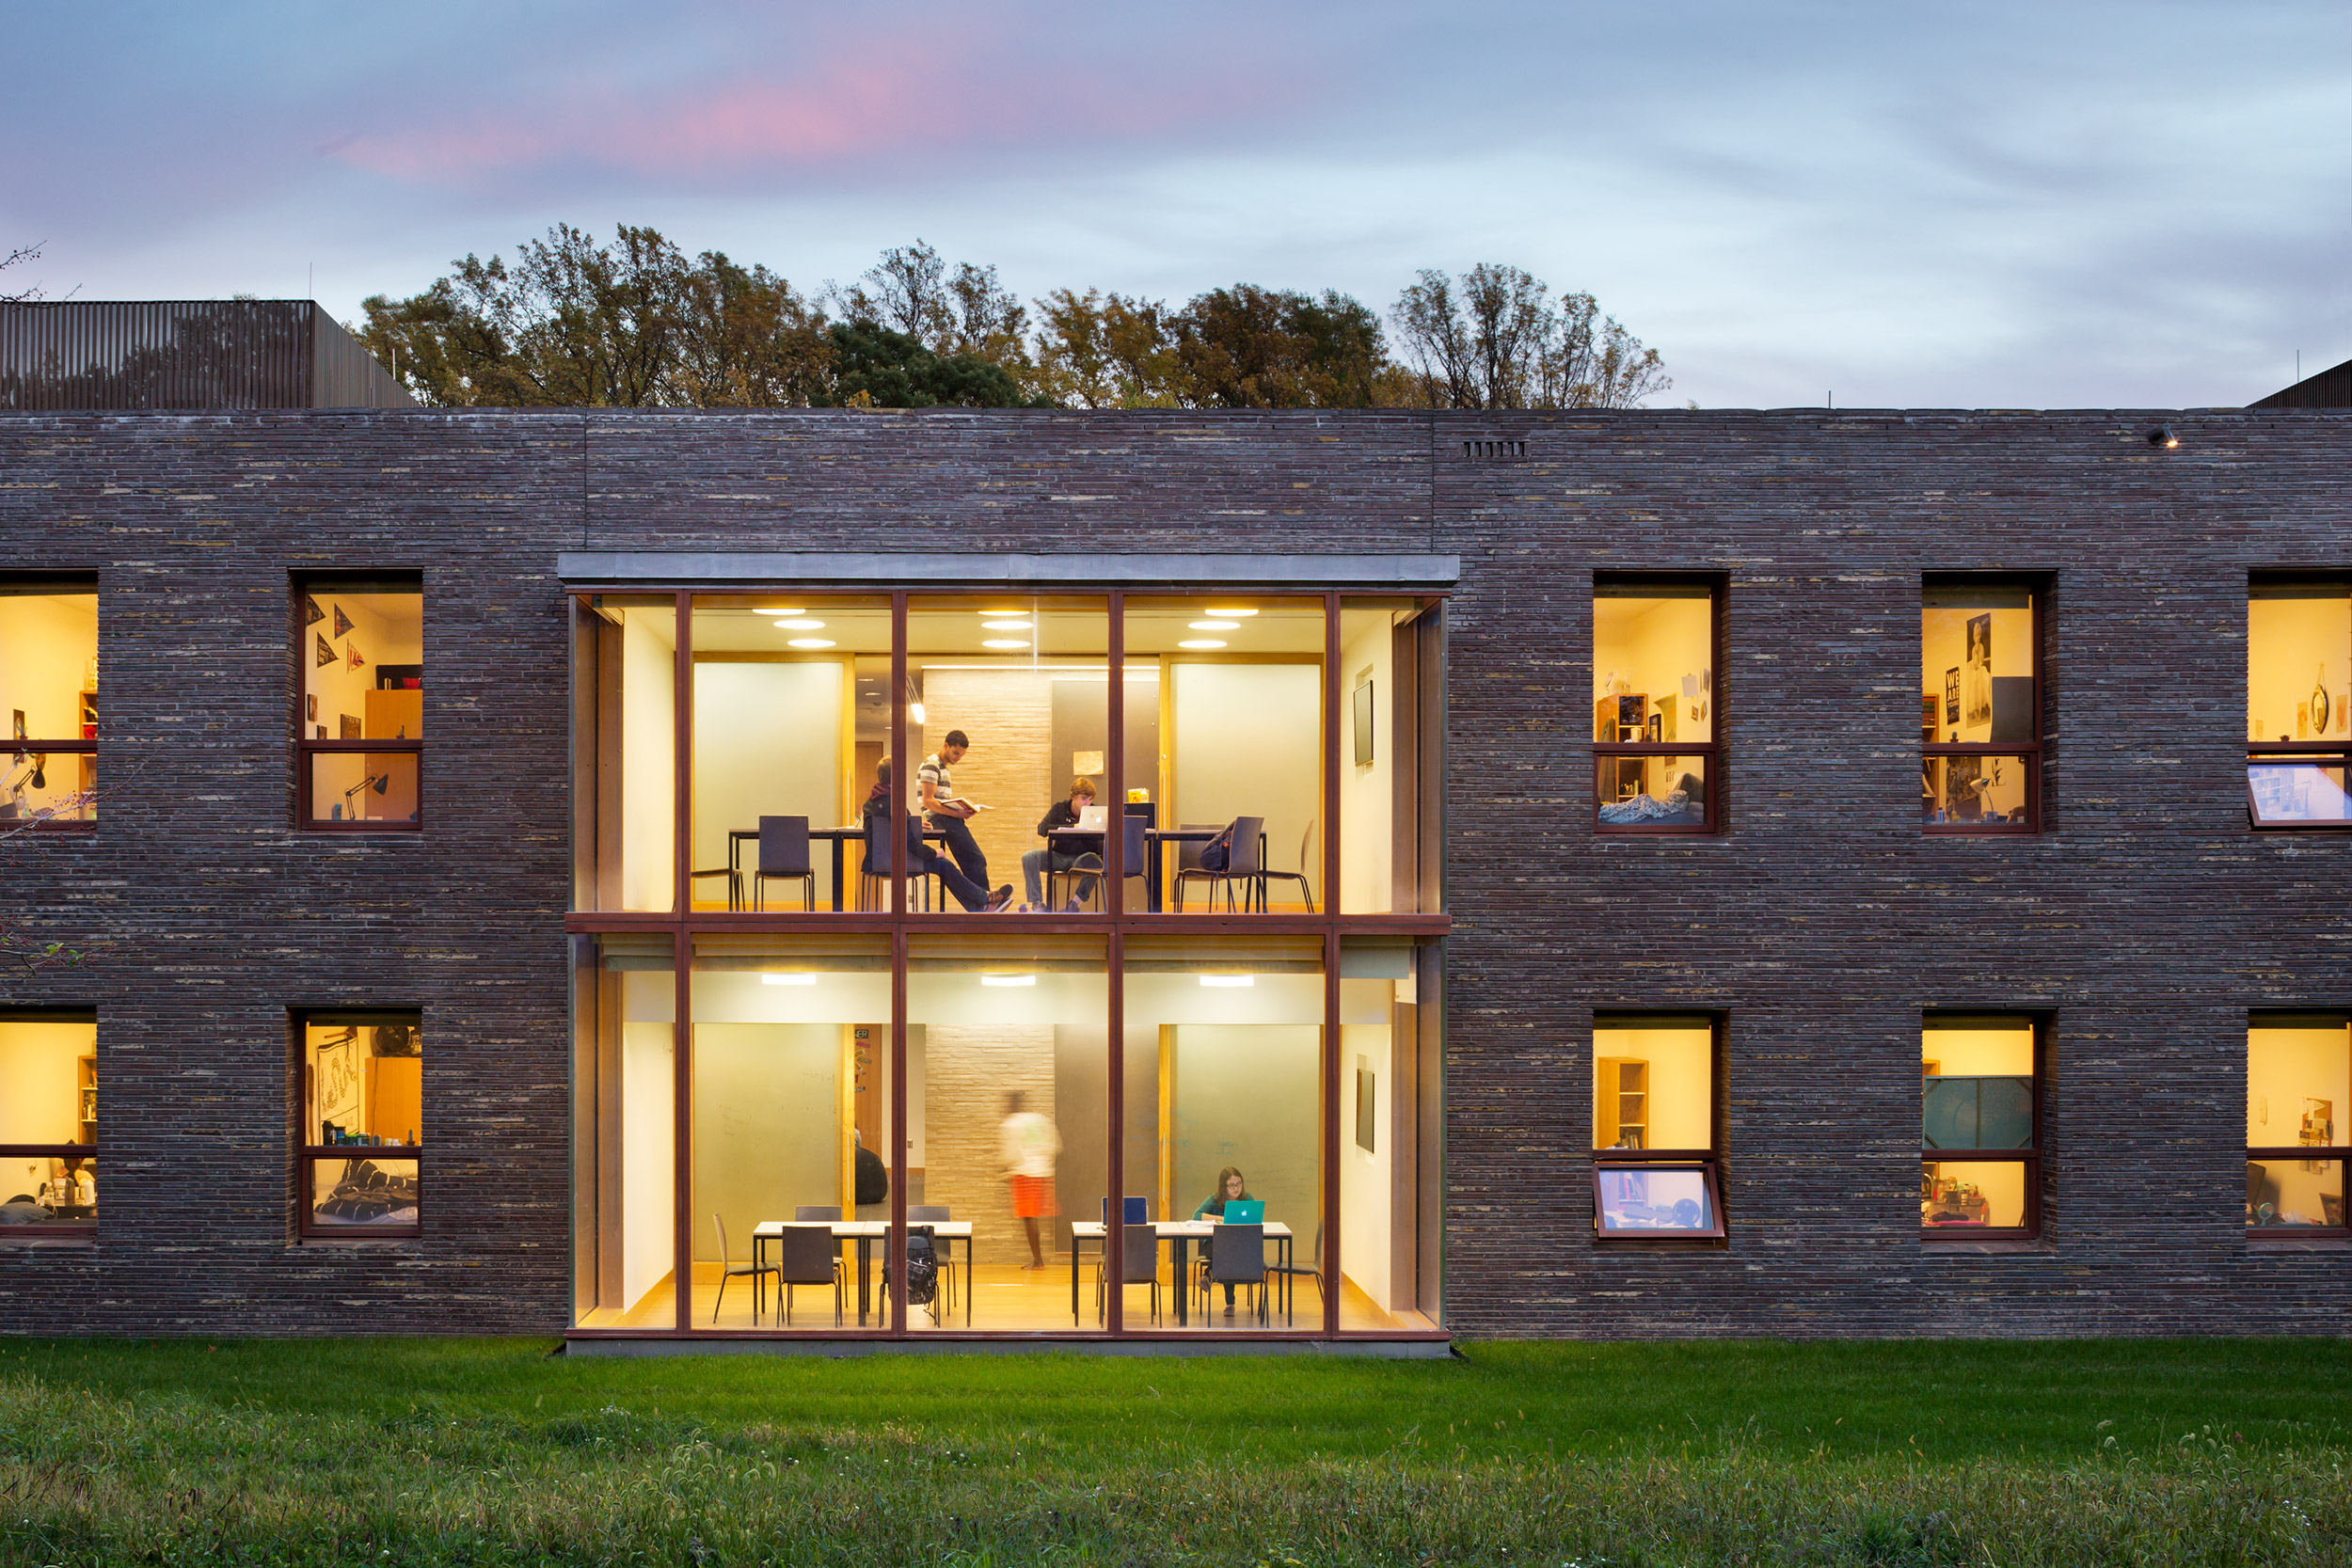 Project: Kim and Tritton Residence Halls, Haverford College. Architect: Tod Williams Billie Tsien Architects | Partners. Landscape Architect: Mathews Nielsen Landscape Architects. Photo: Michael Moran/OTTO.